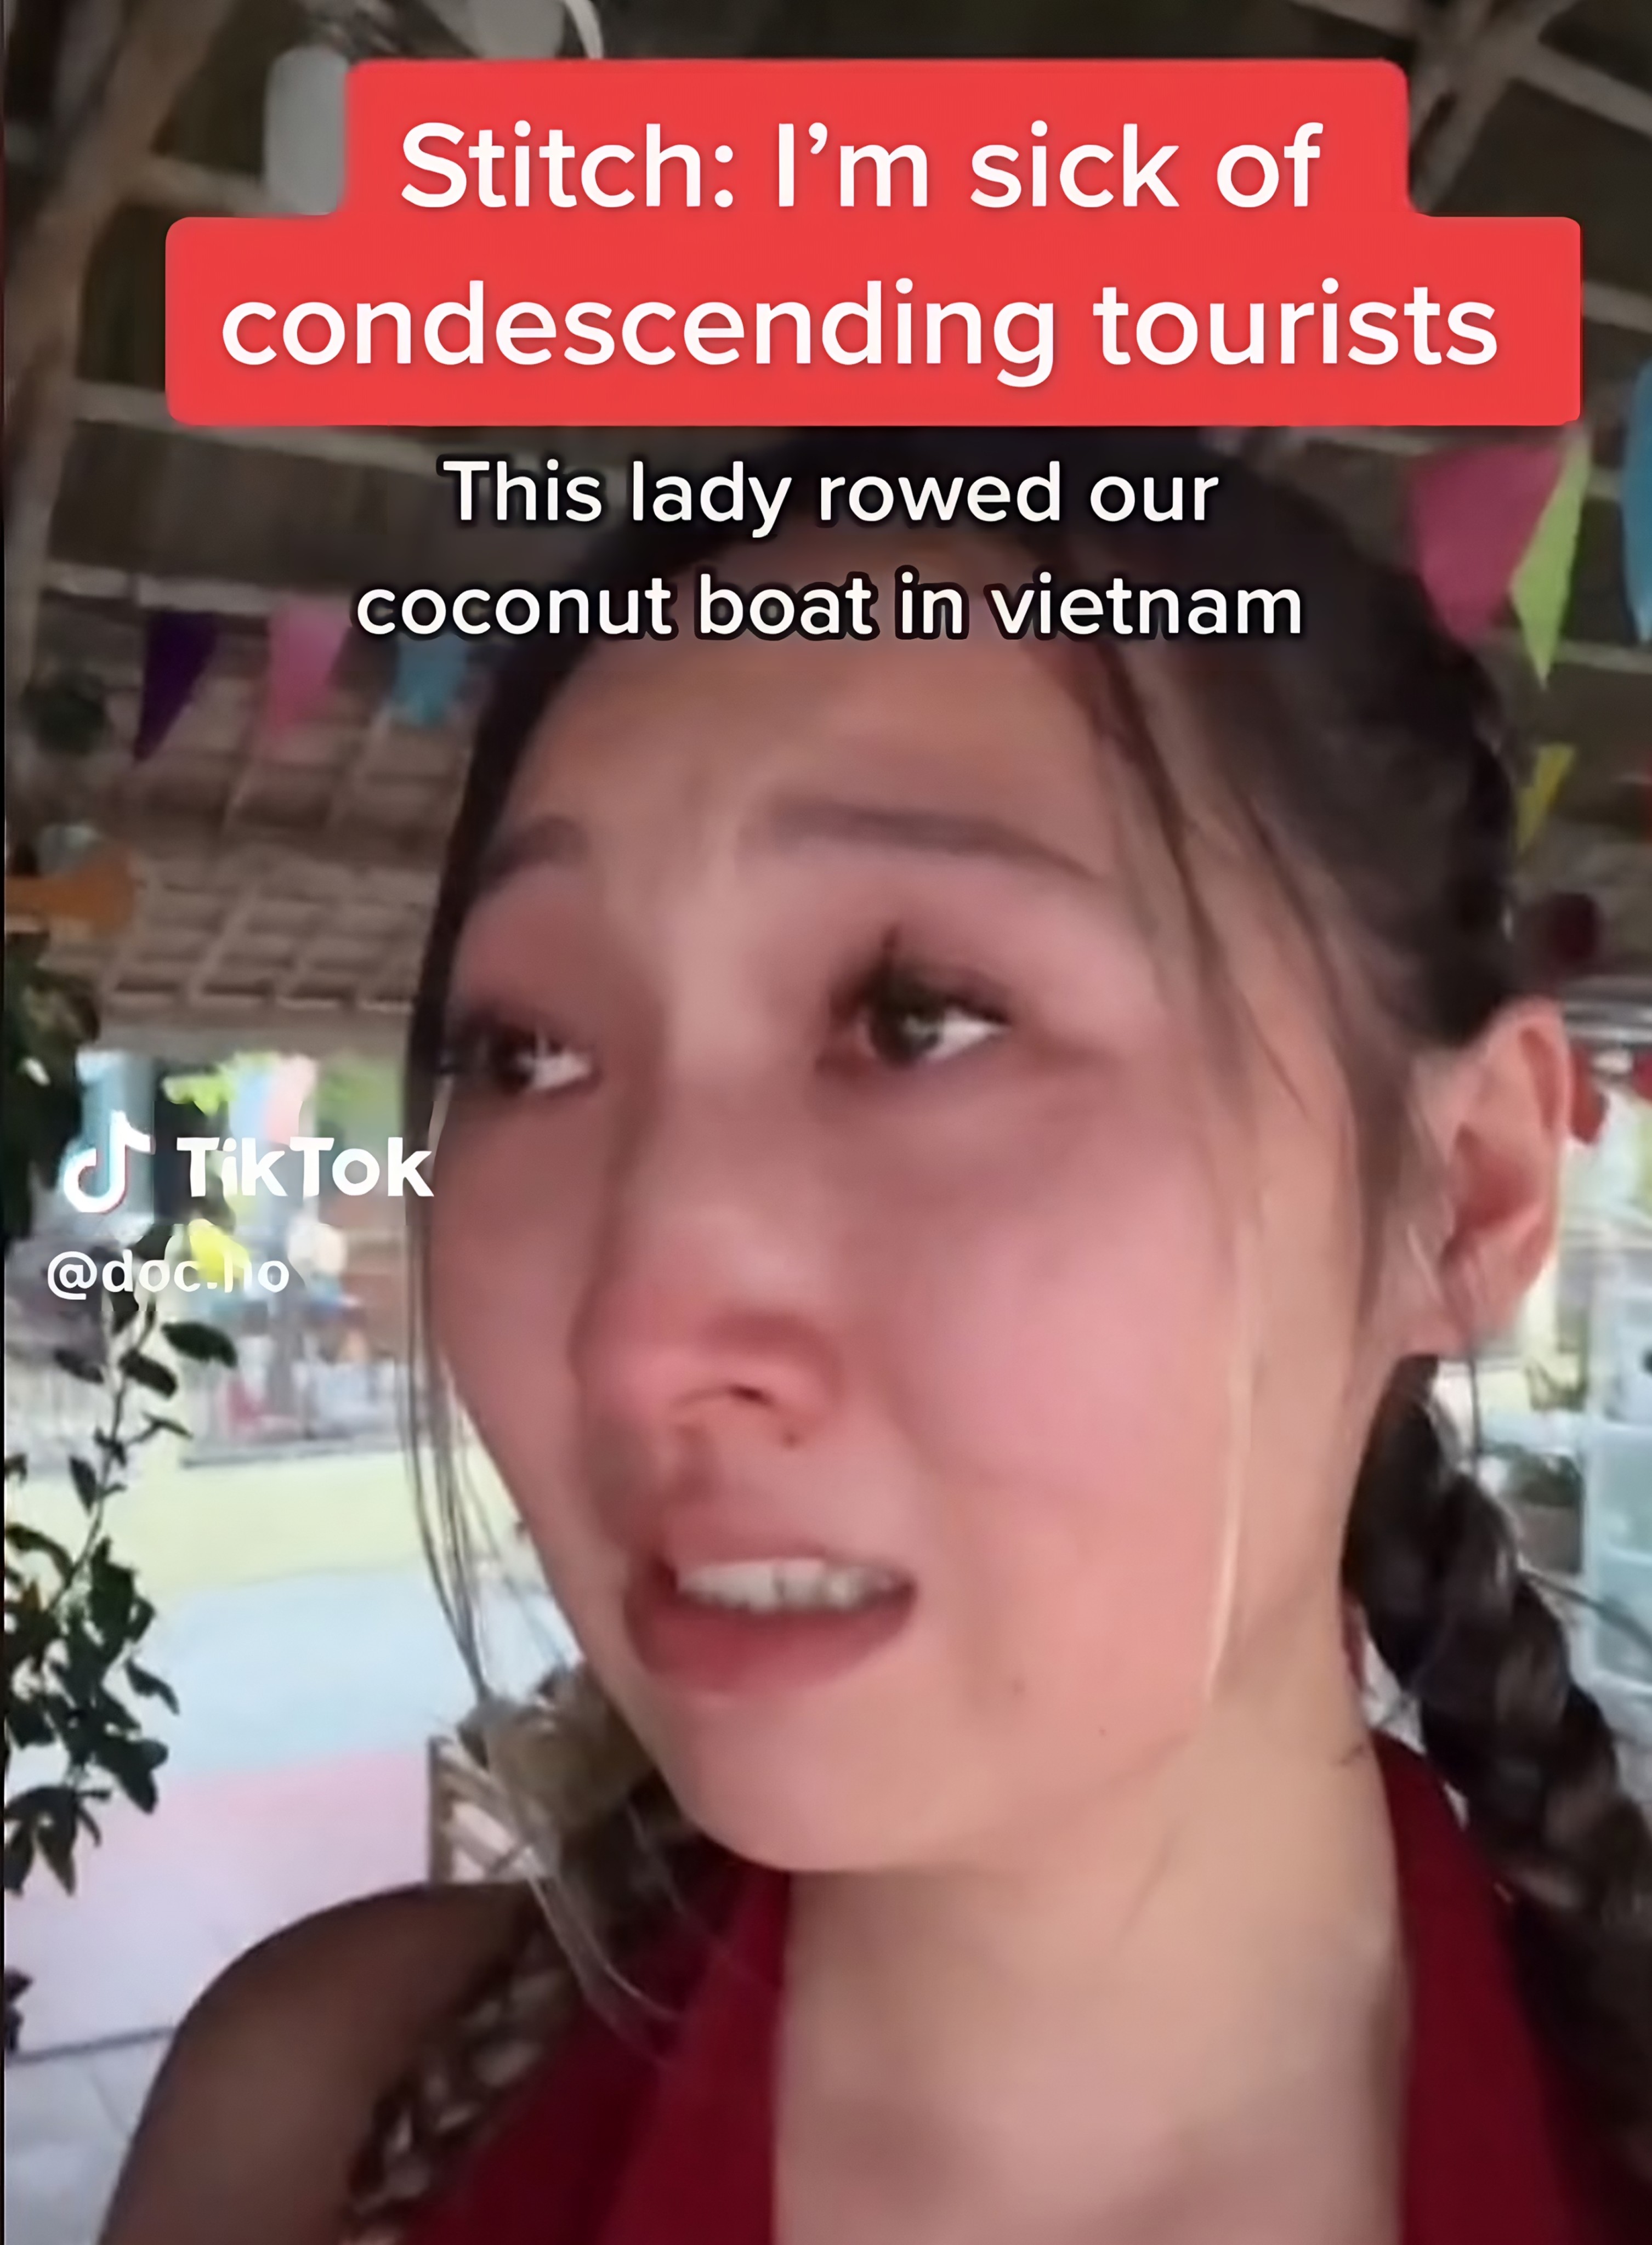 Asian-Australian travel TikTokker Fiona Wang is facing a backlash after posting a tearful video about her time in Vietnam. Photo: TikTok/@doc.ho